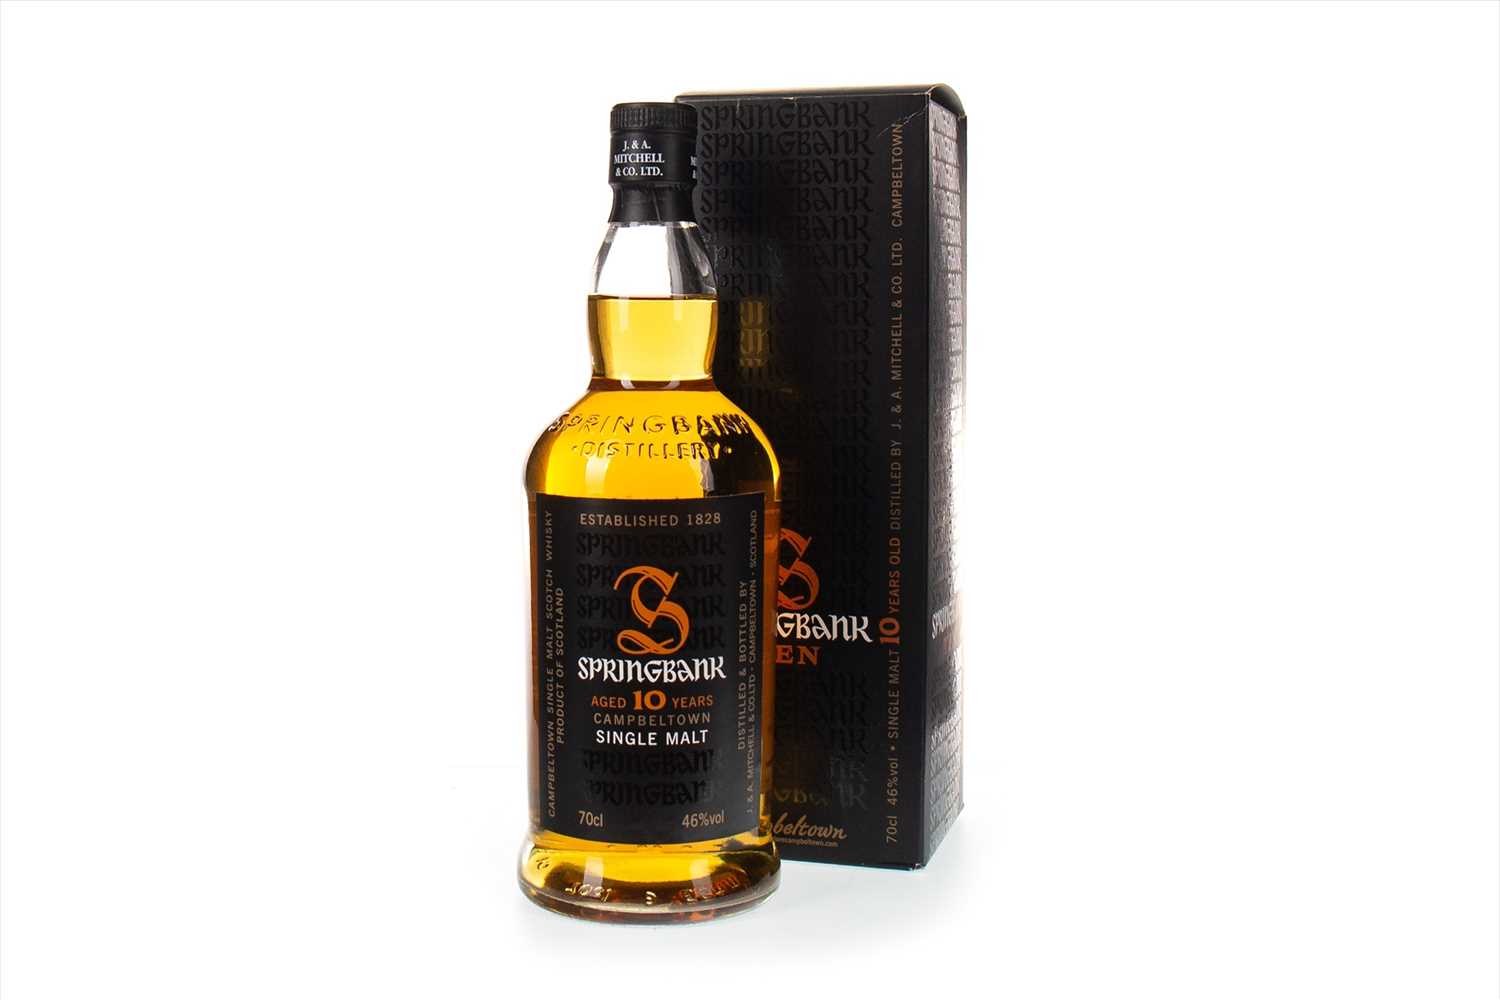 Lot 334 - SPRINGBANK AGED 10 YEARS